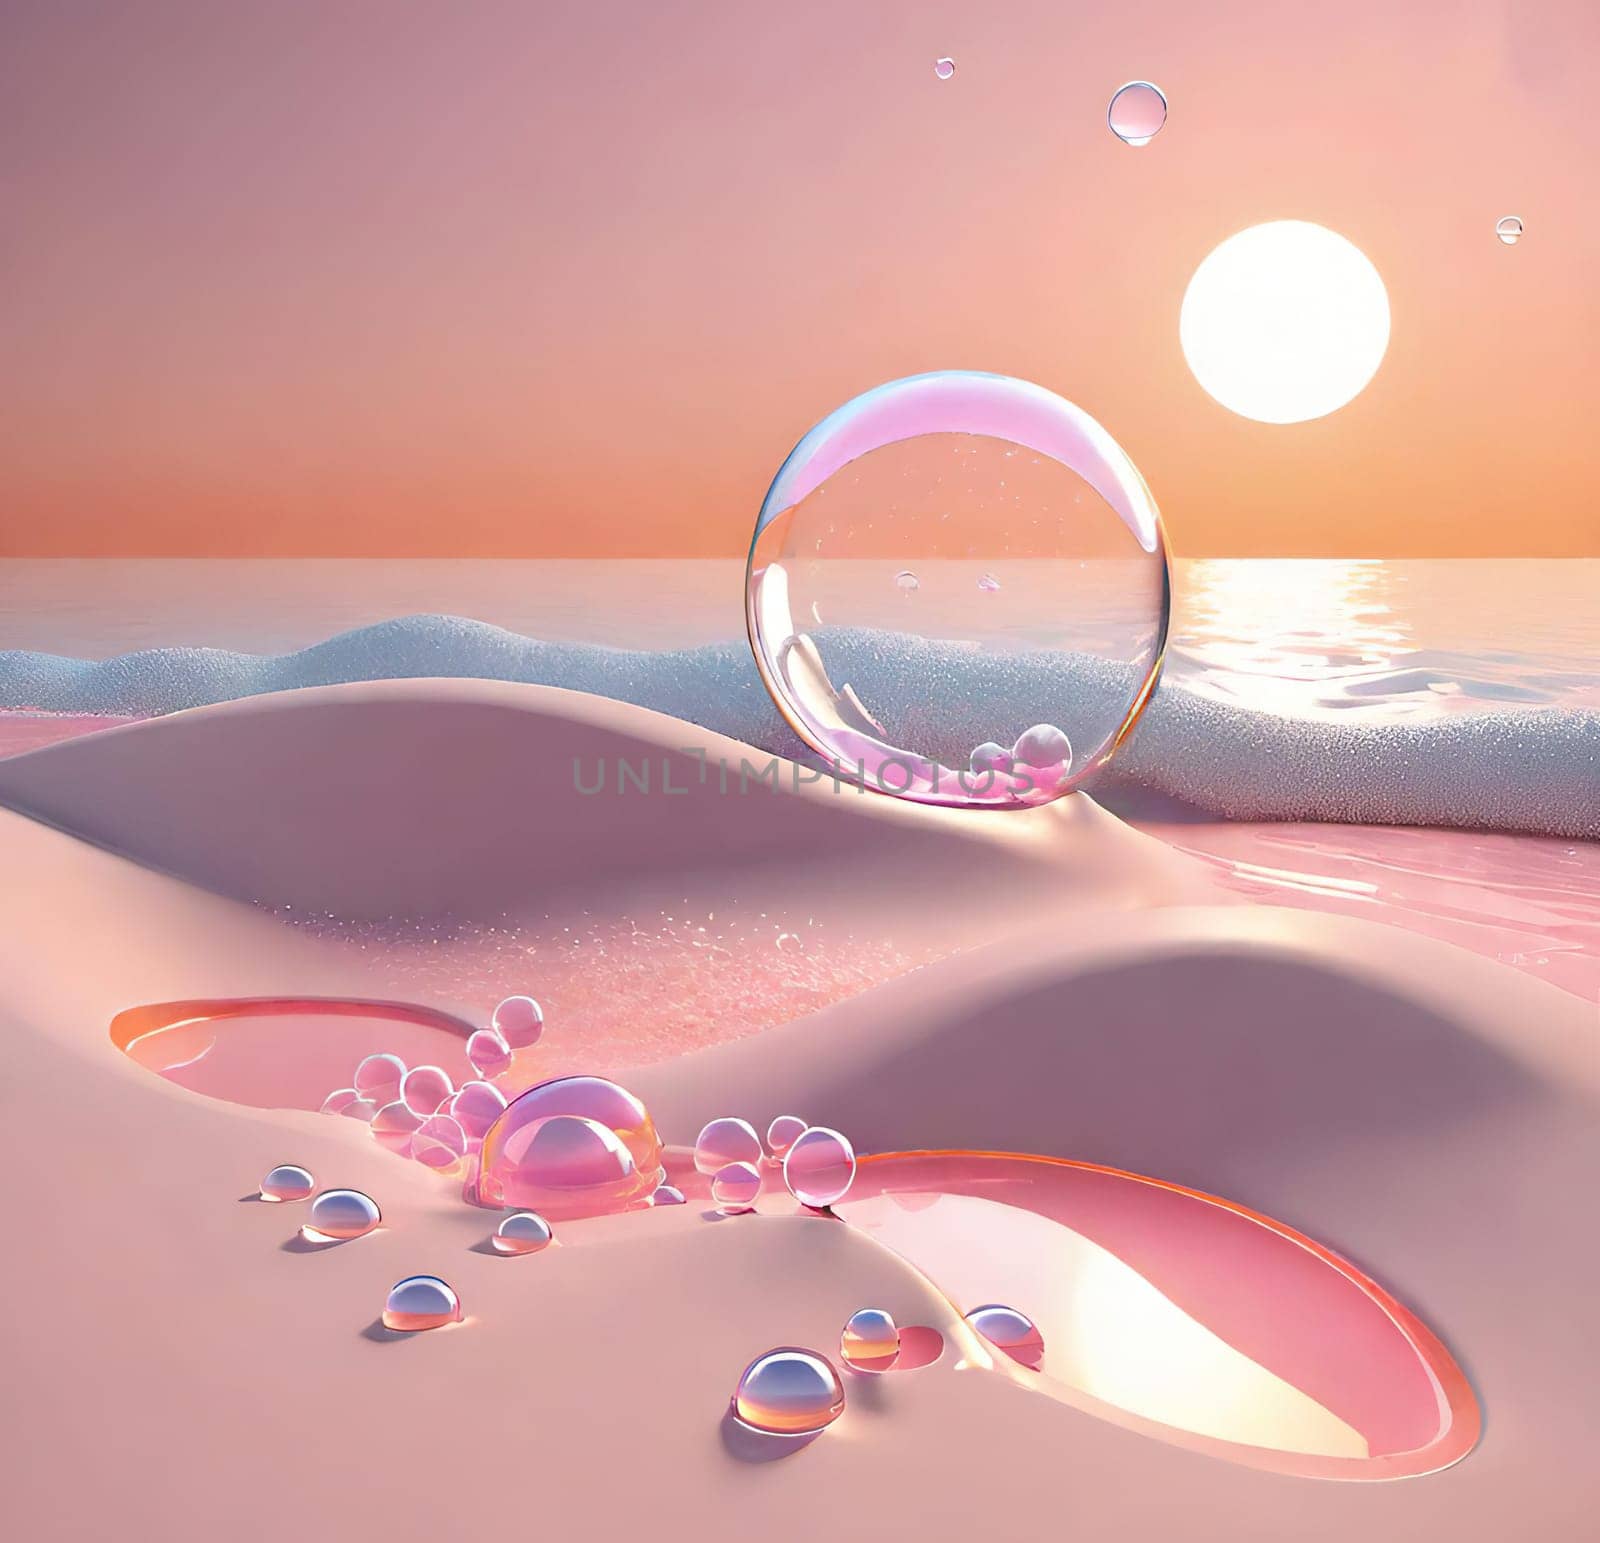 Beautiful 3d illustration of an abstract background with bubbles and waves.abstract scene with waves and bubbles in water. 3d render.Soap bubbles in the sea at sunset.Soap bubbles on the beach at sunset.